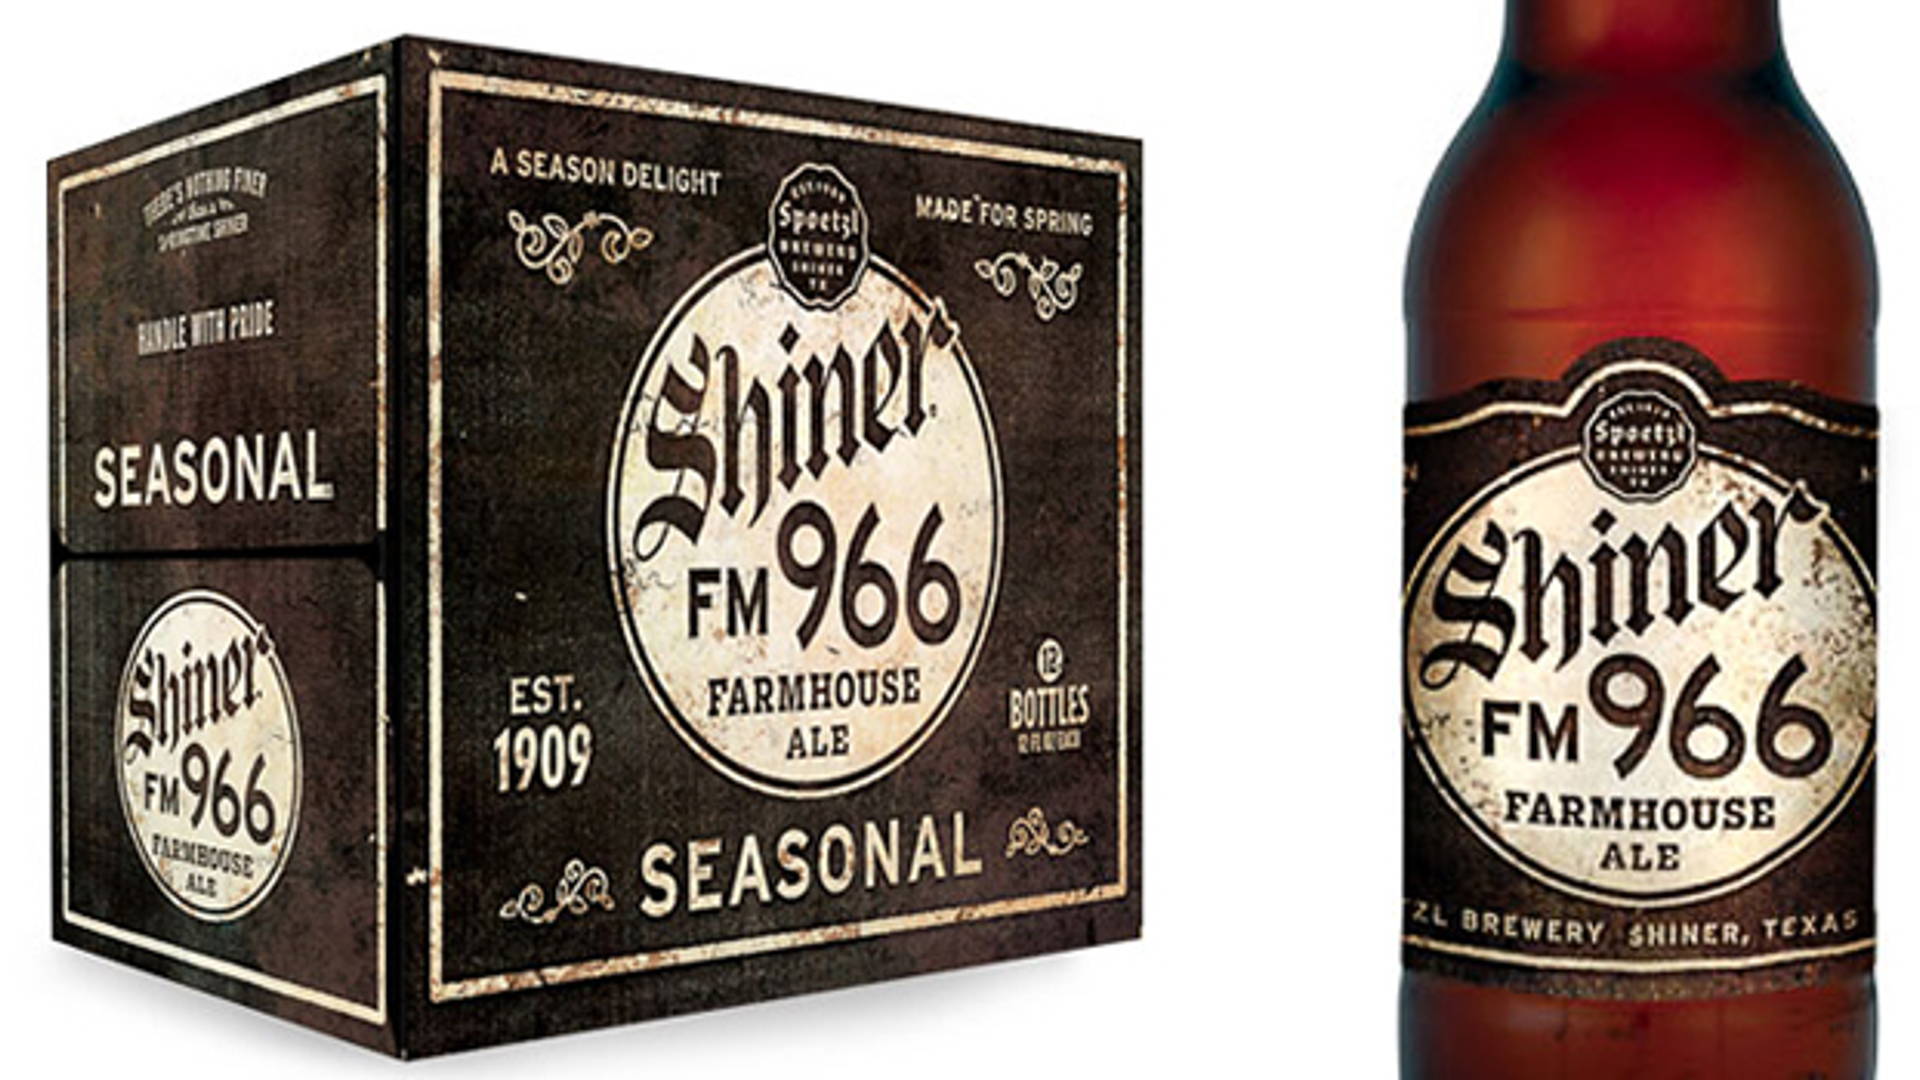 Featured image for Shiner FM 966